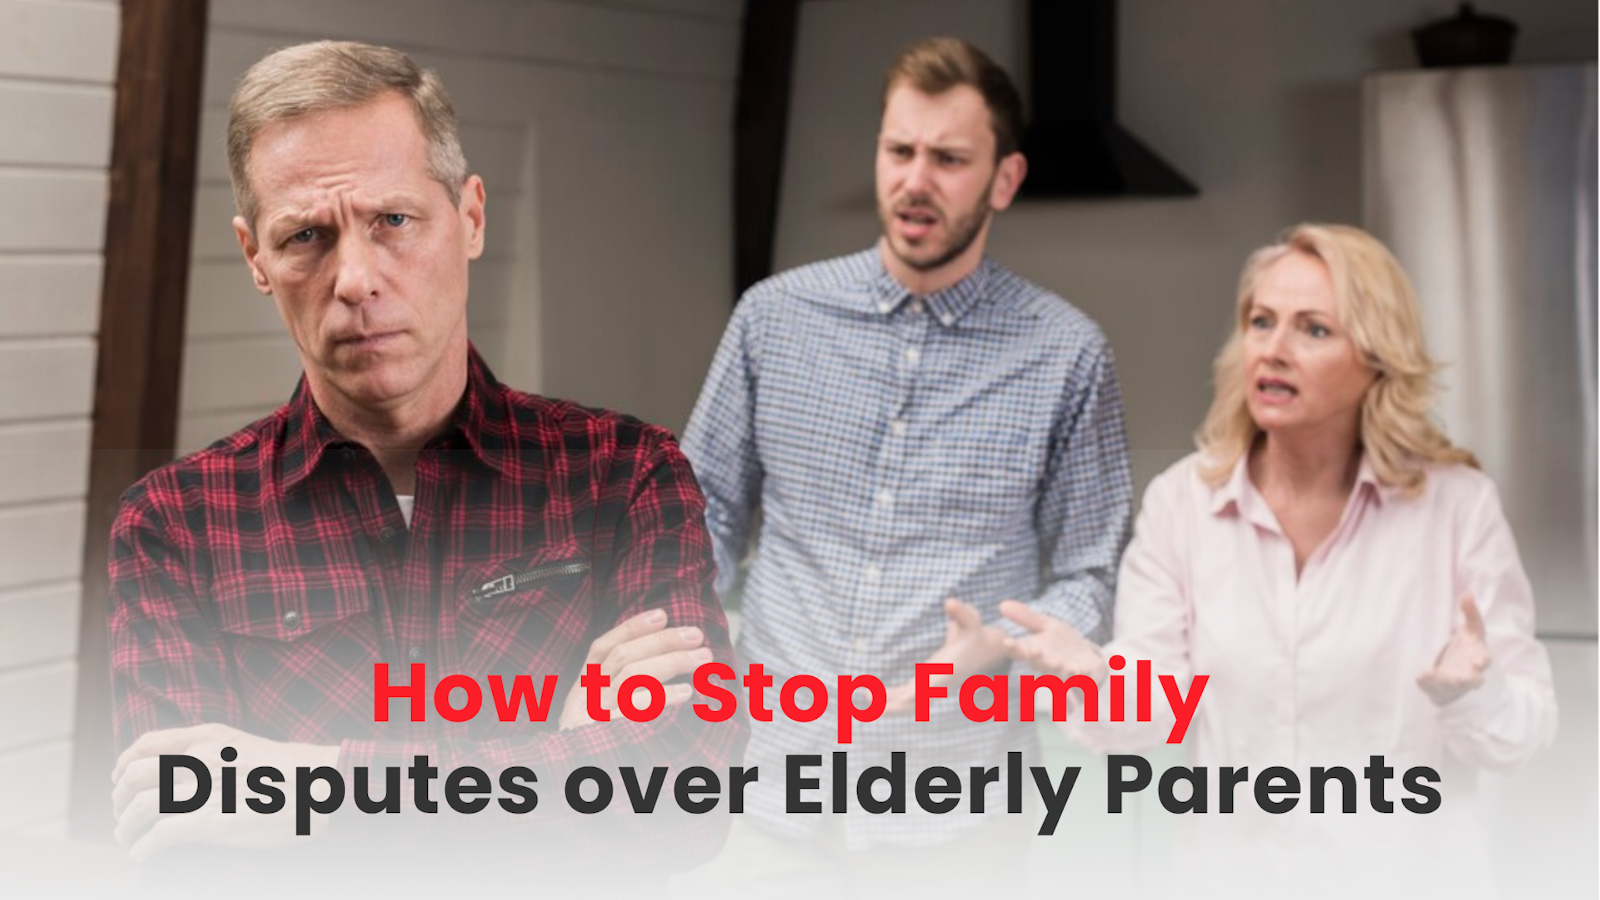 How to Stop Family Disputes over Elderly Parents